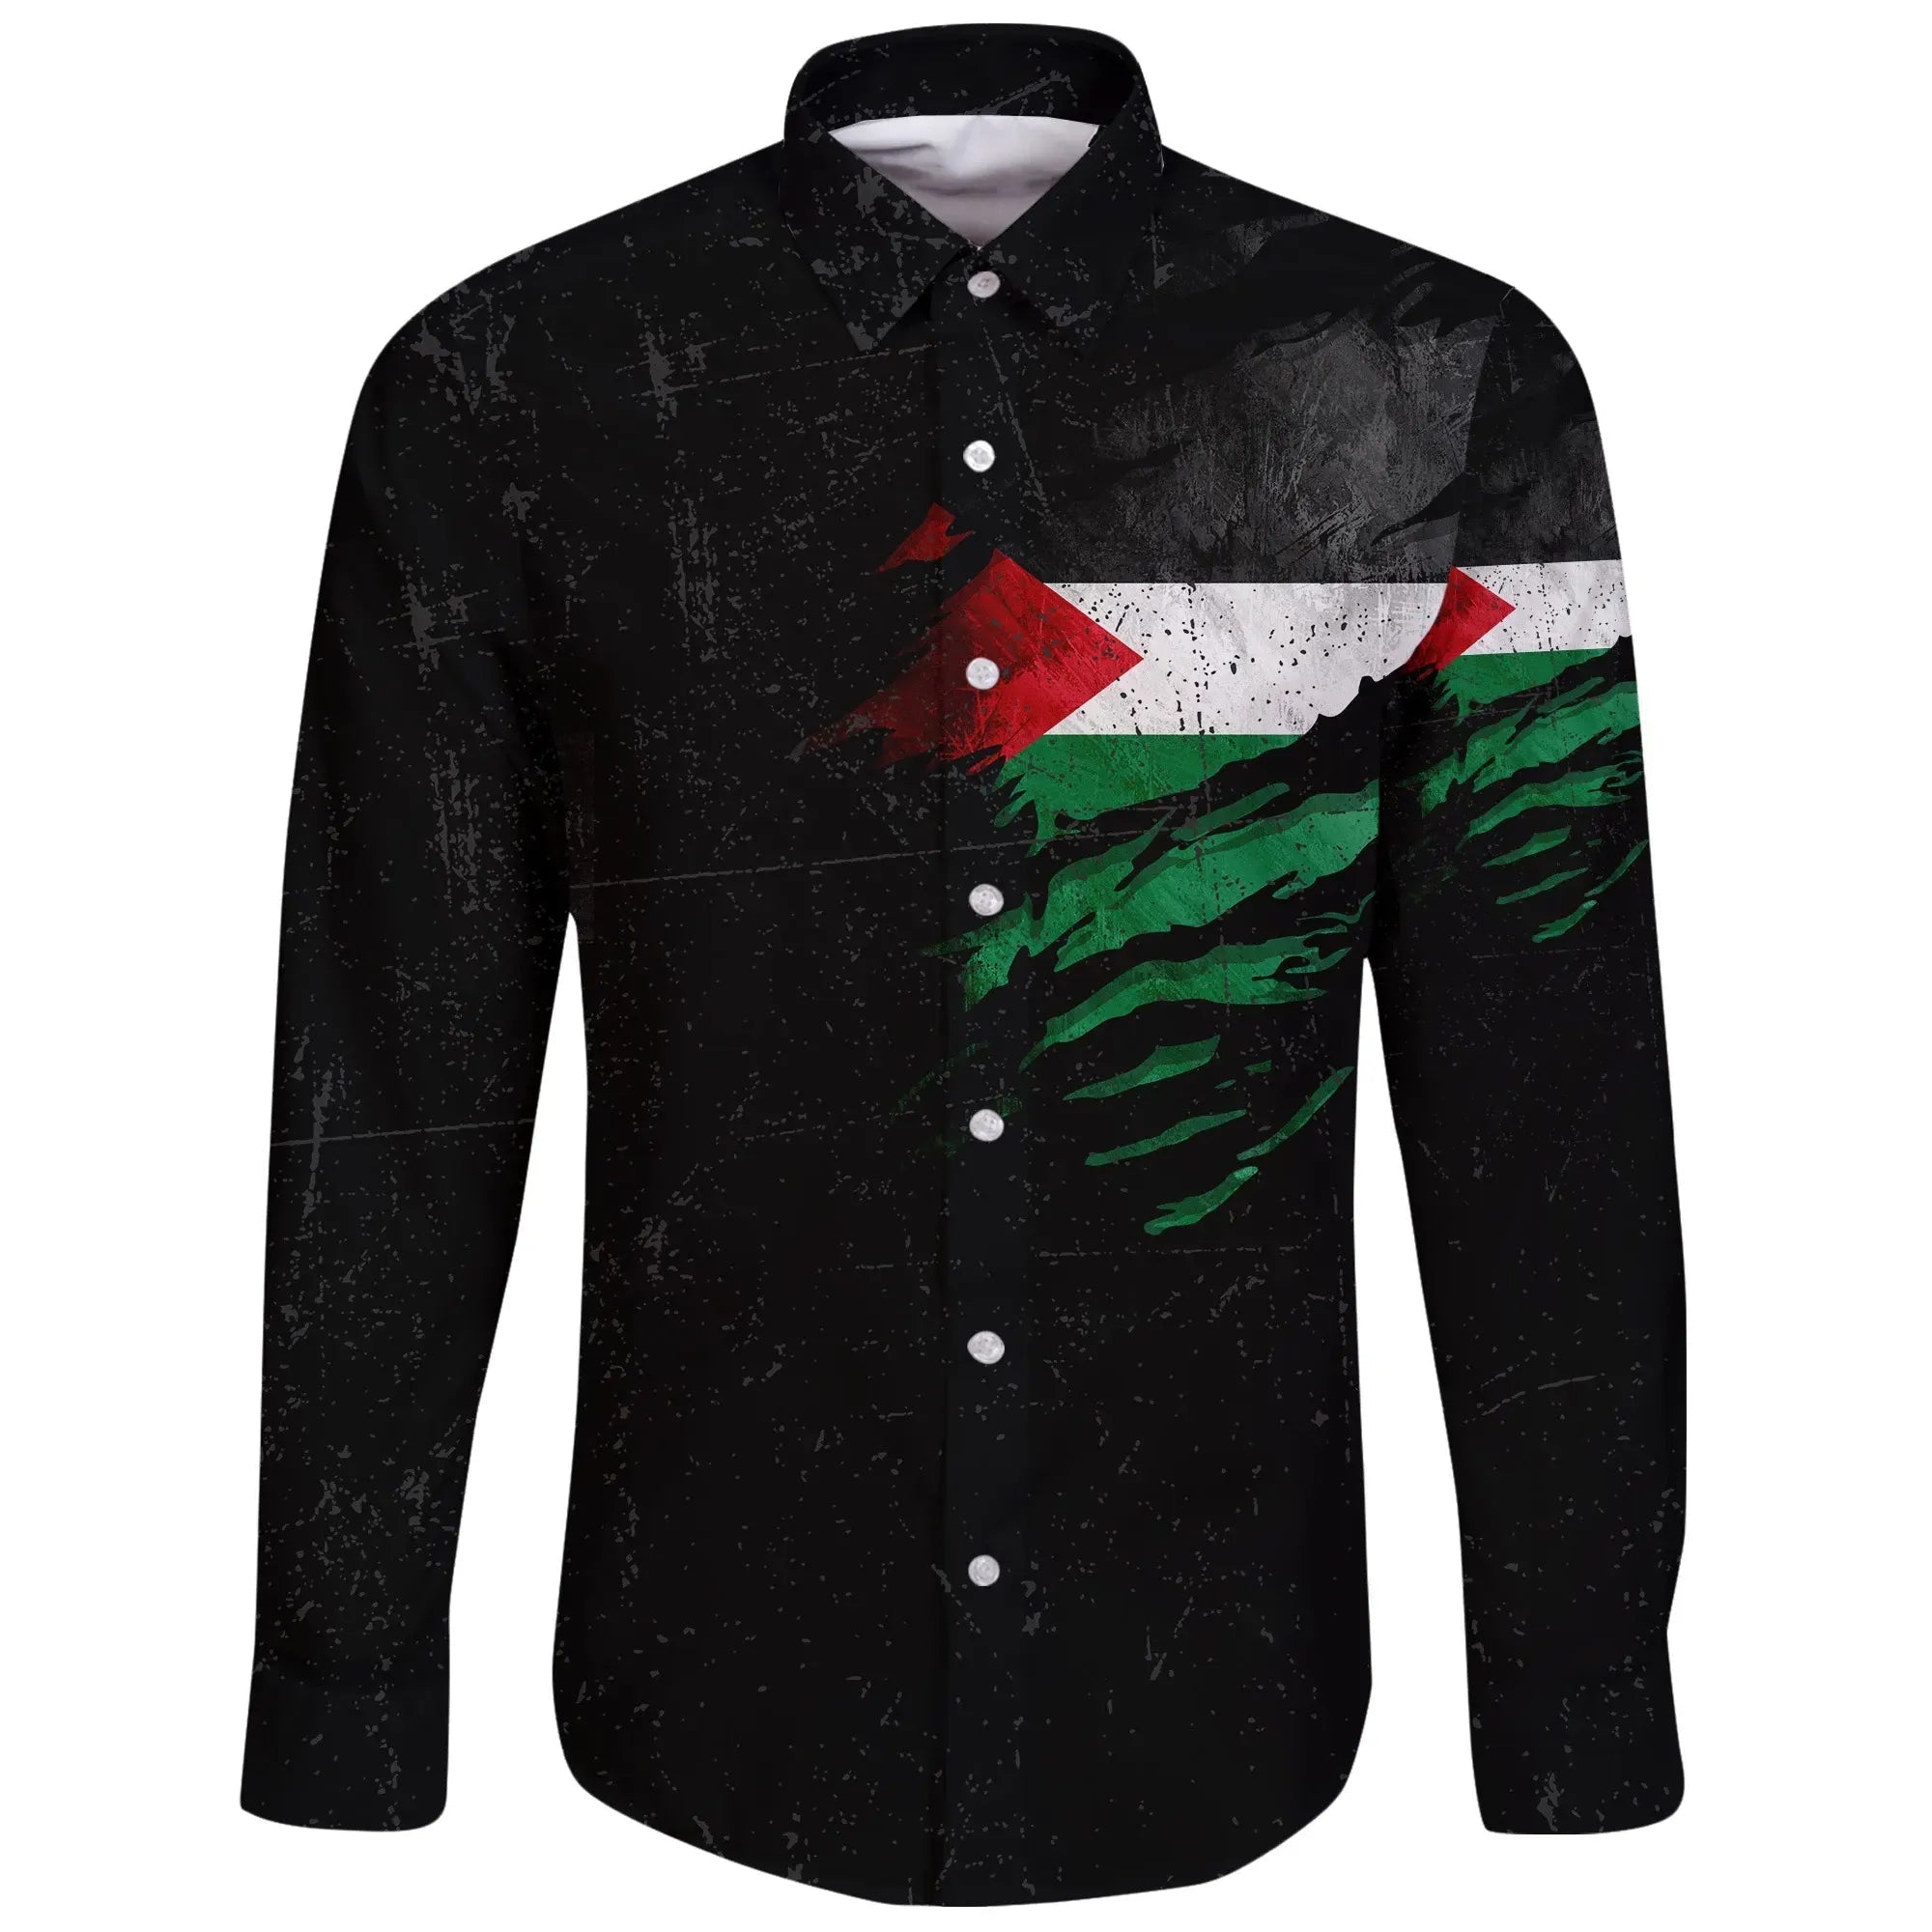 palestine-in-me-long-sleeve-button-shirt-special-grunge-style